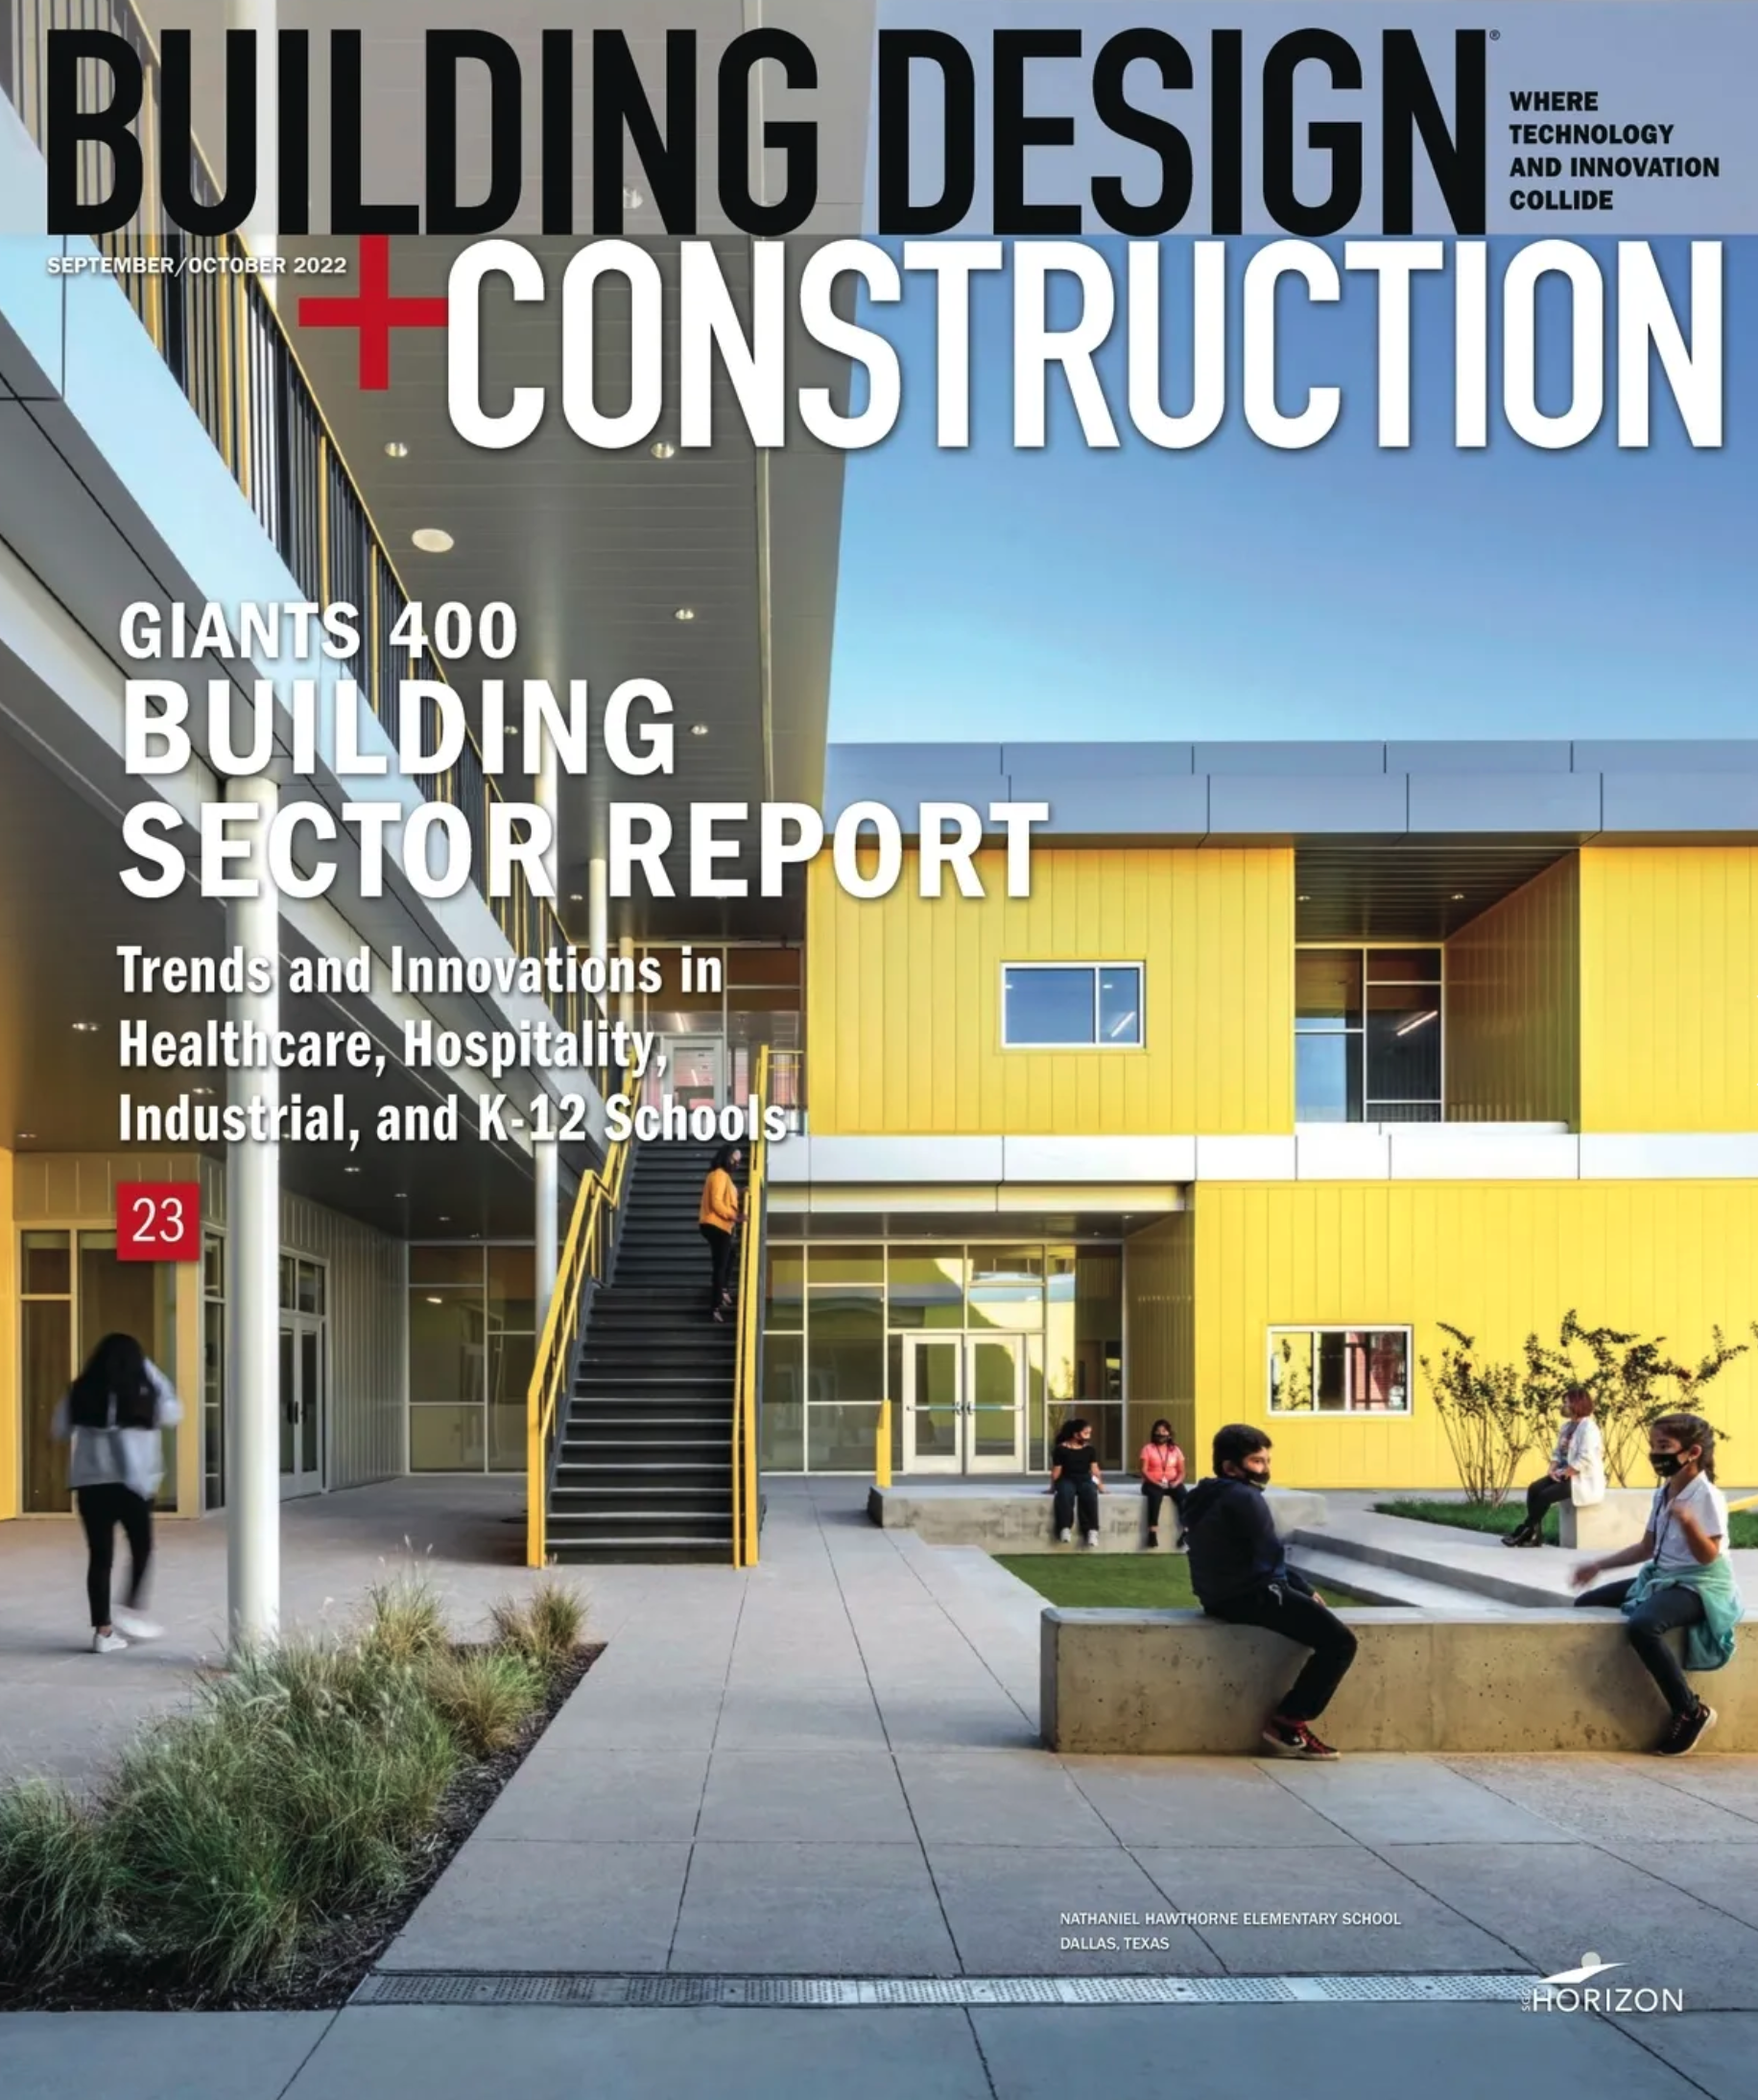 Building Design and Construction magazine September October 2022 issue